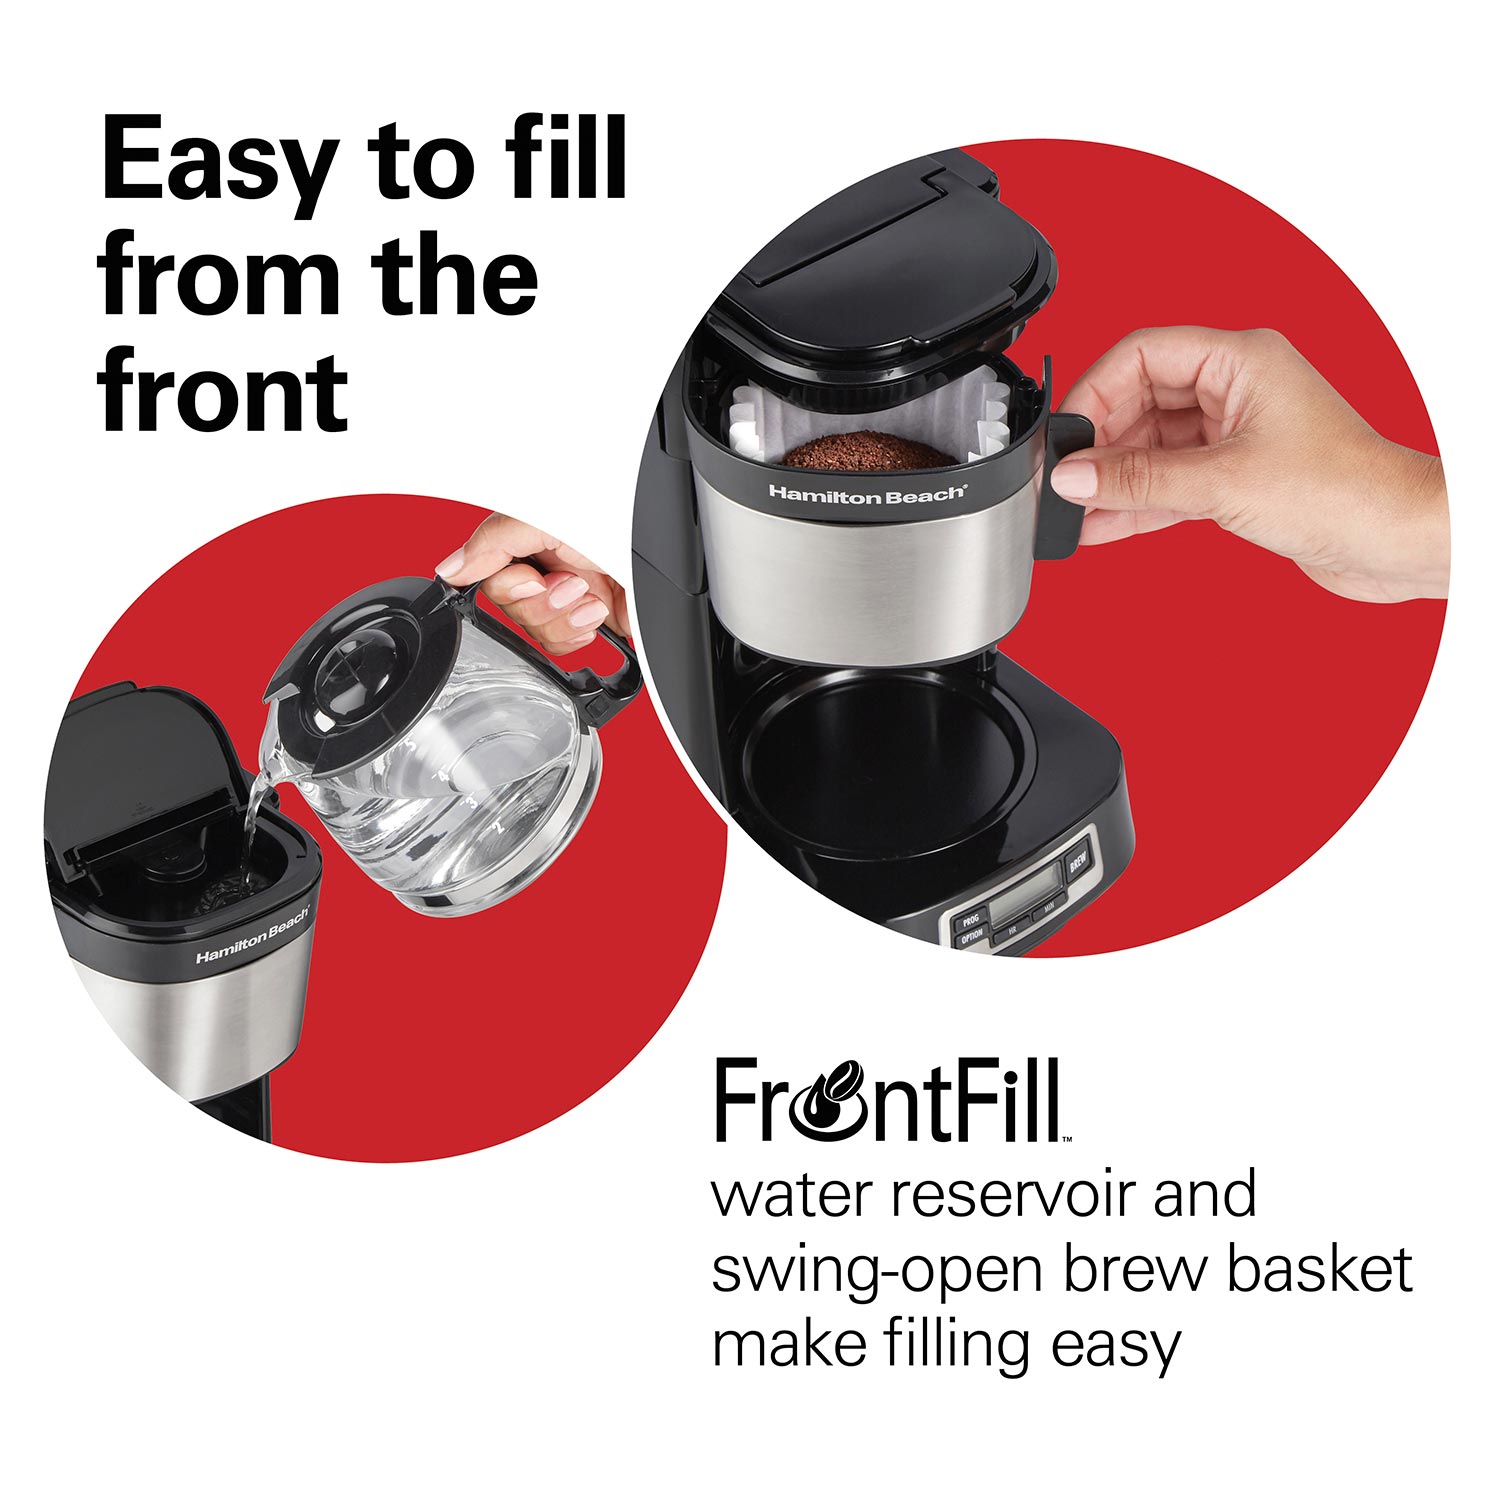 Hamilton Beach Front Fill Coffee Maker Review (Is it really that